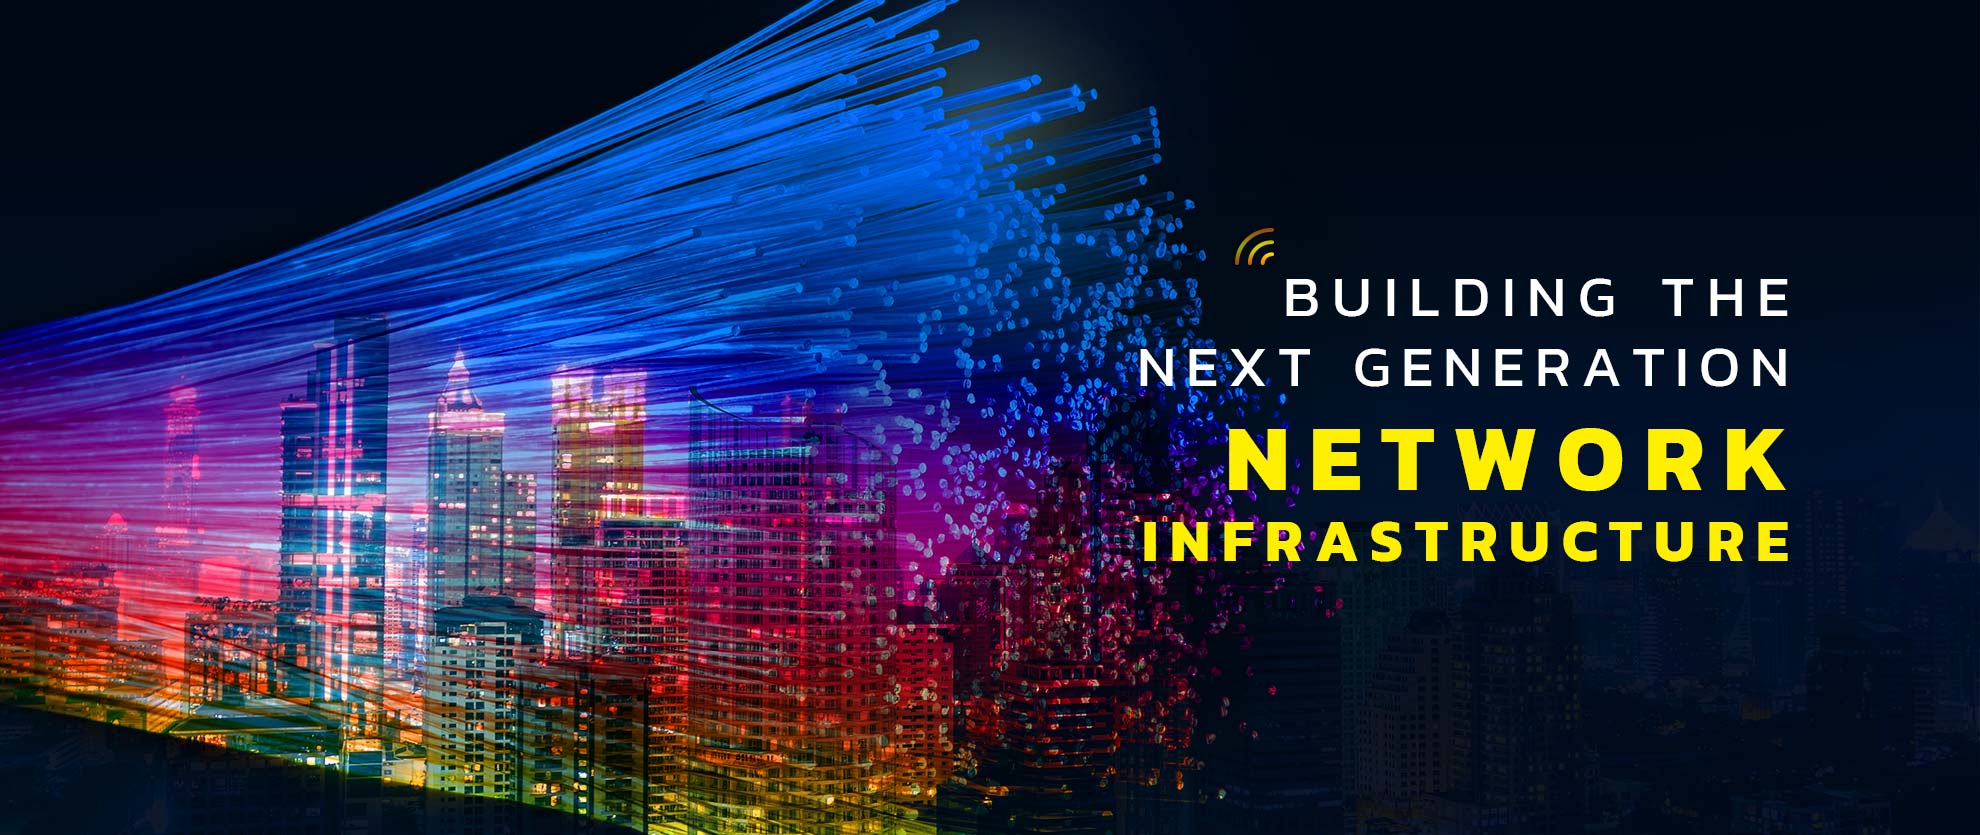 Building the Next Generation Network Infrastructure